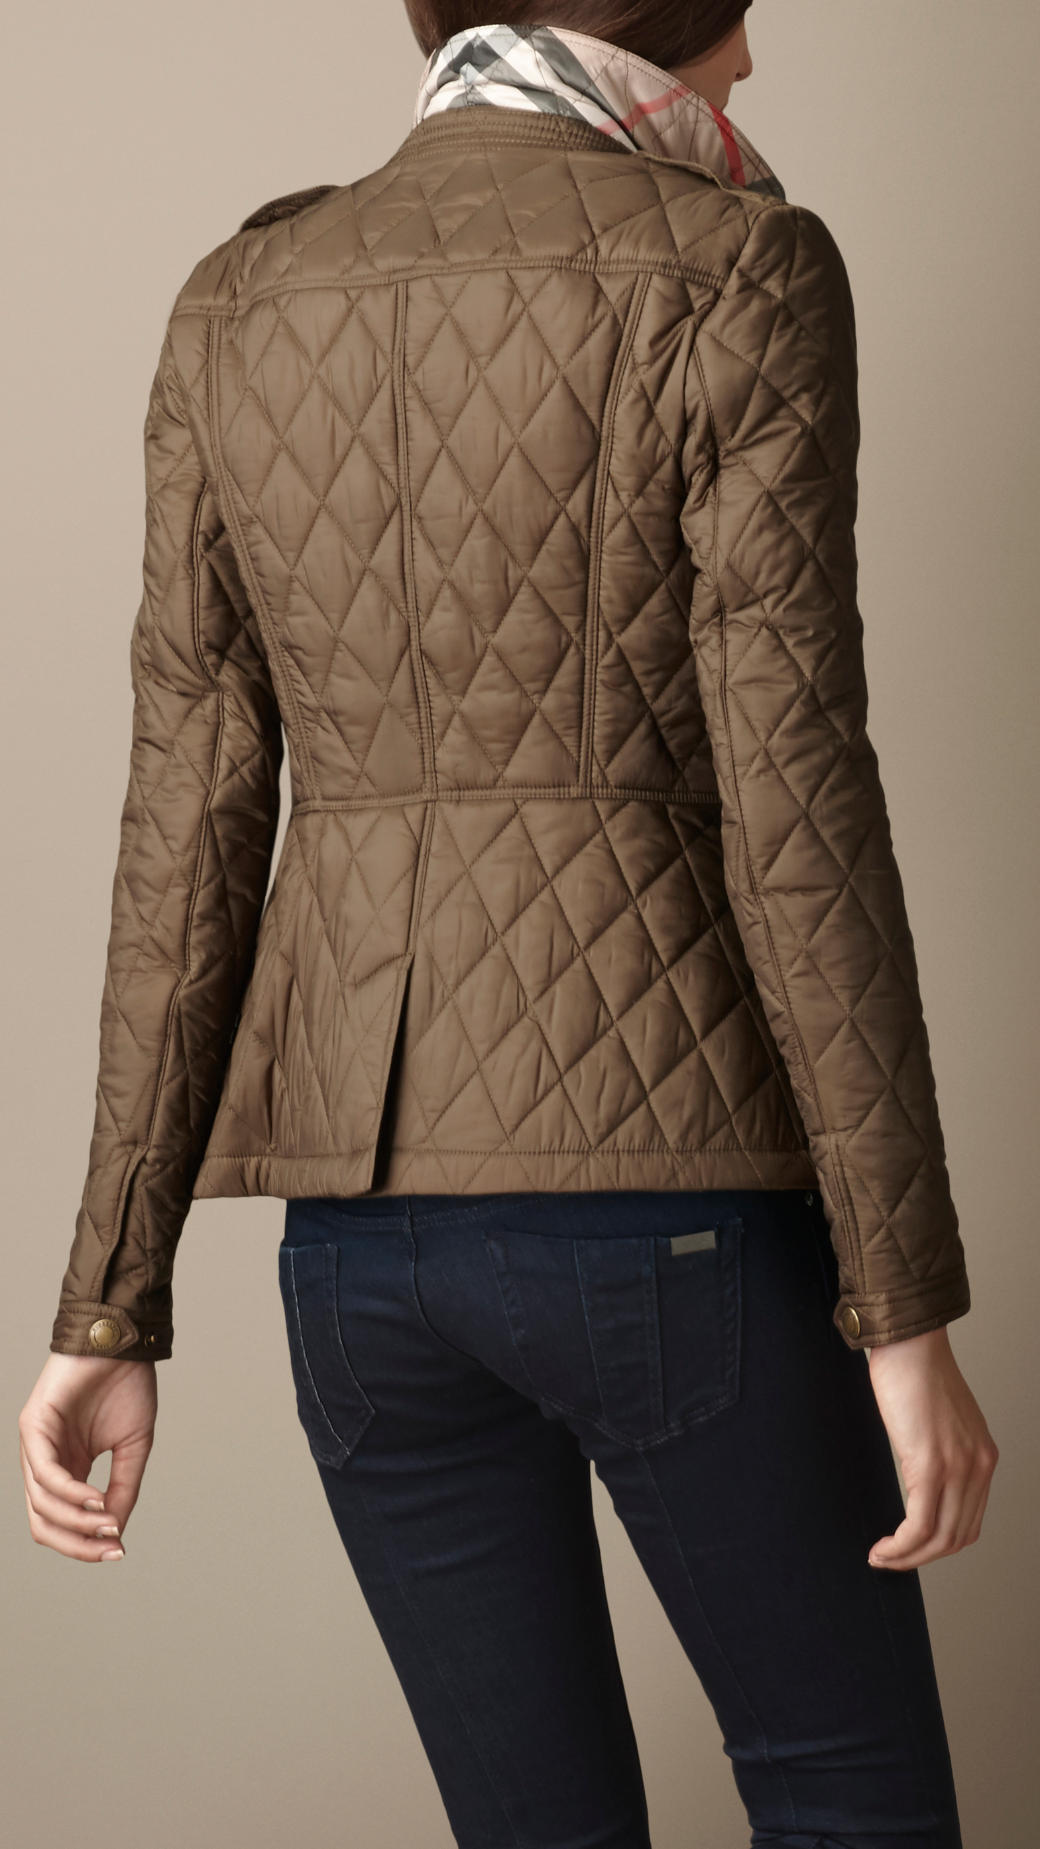 Lyst - Burberry Fitted Diamond Quilt Jacket in Brown